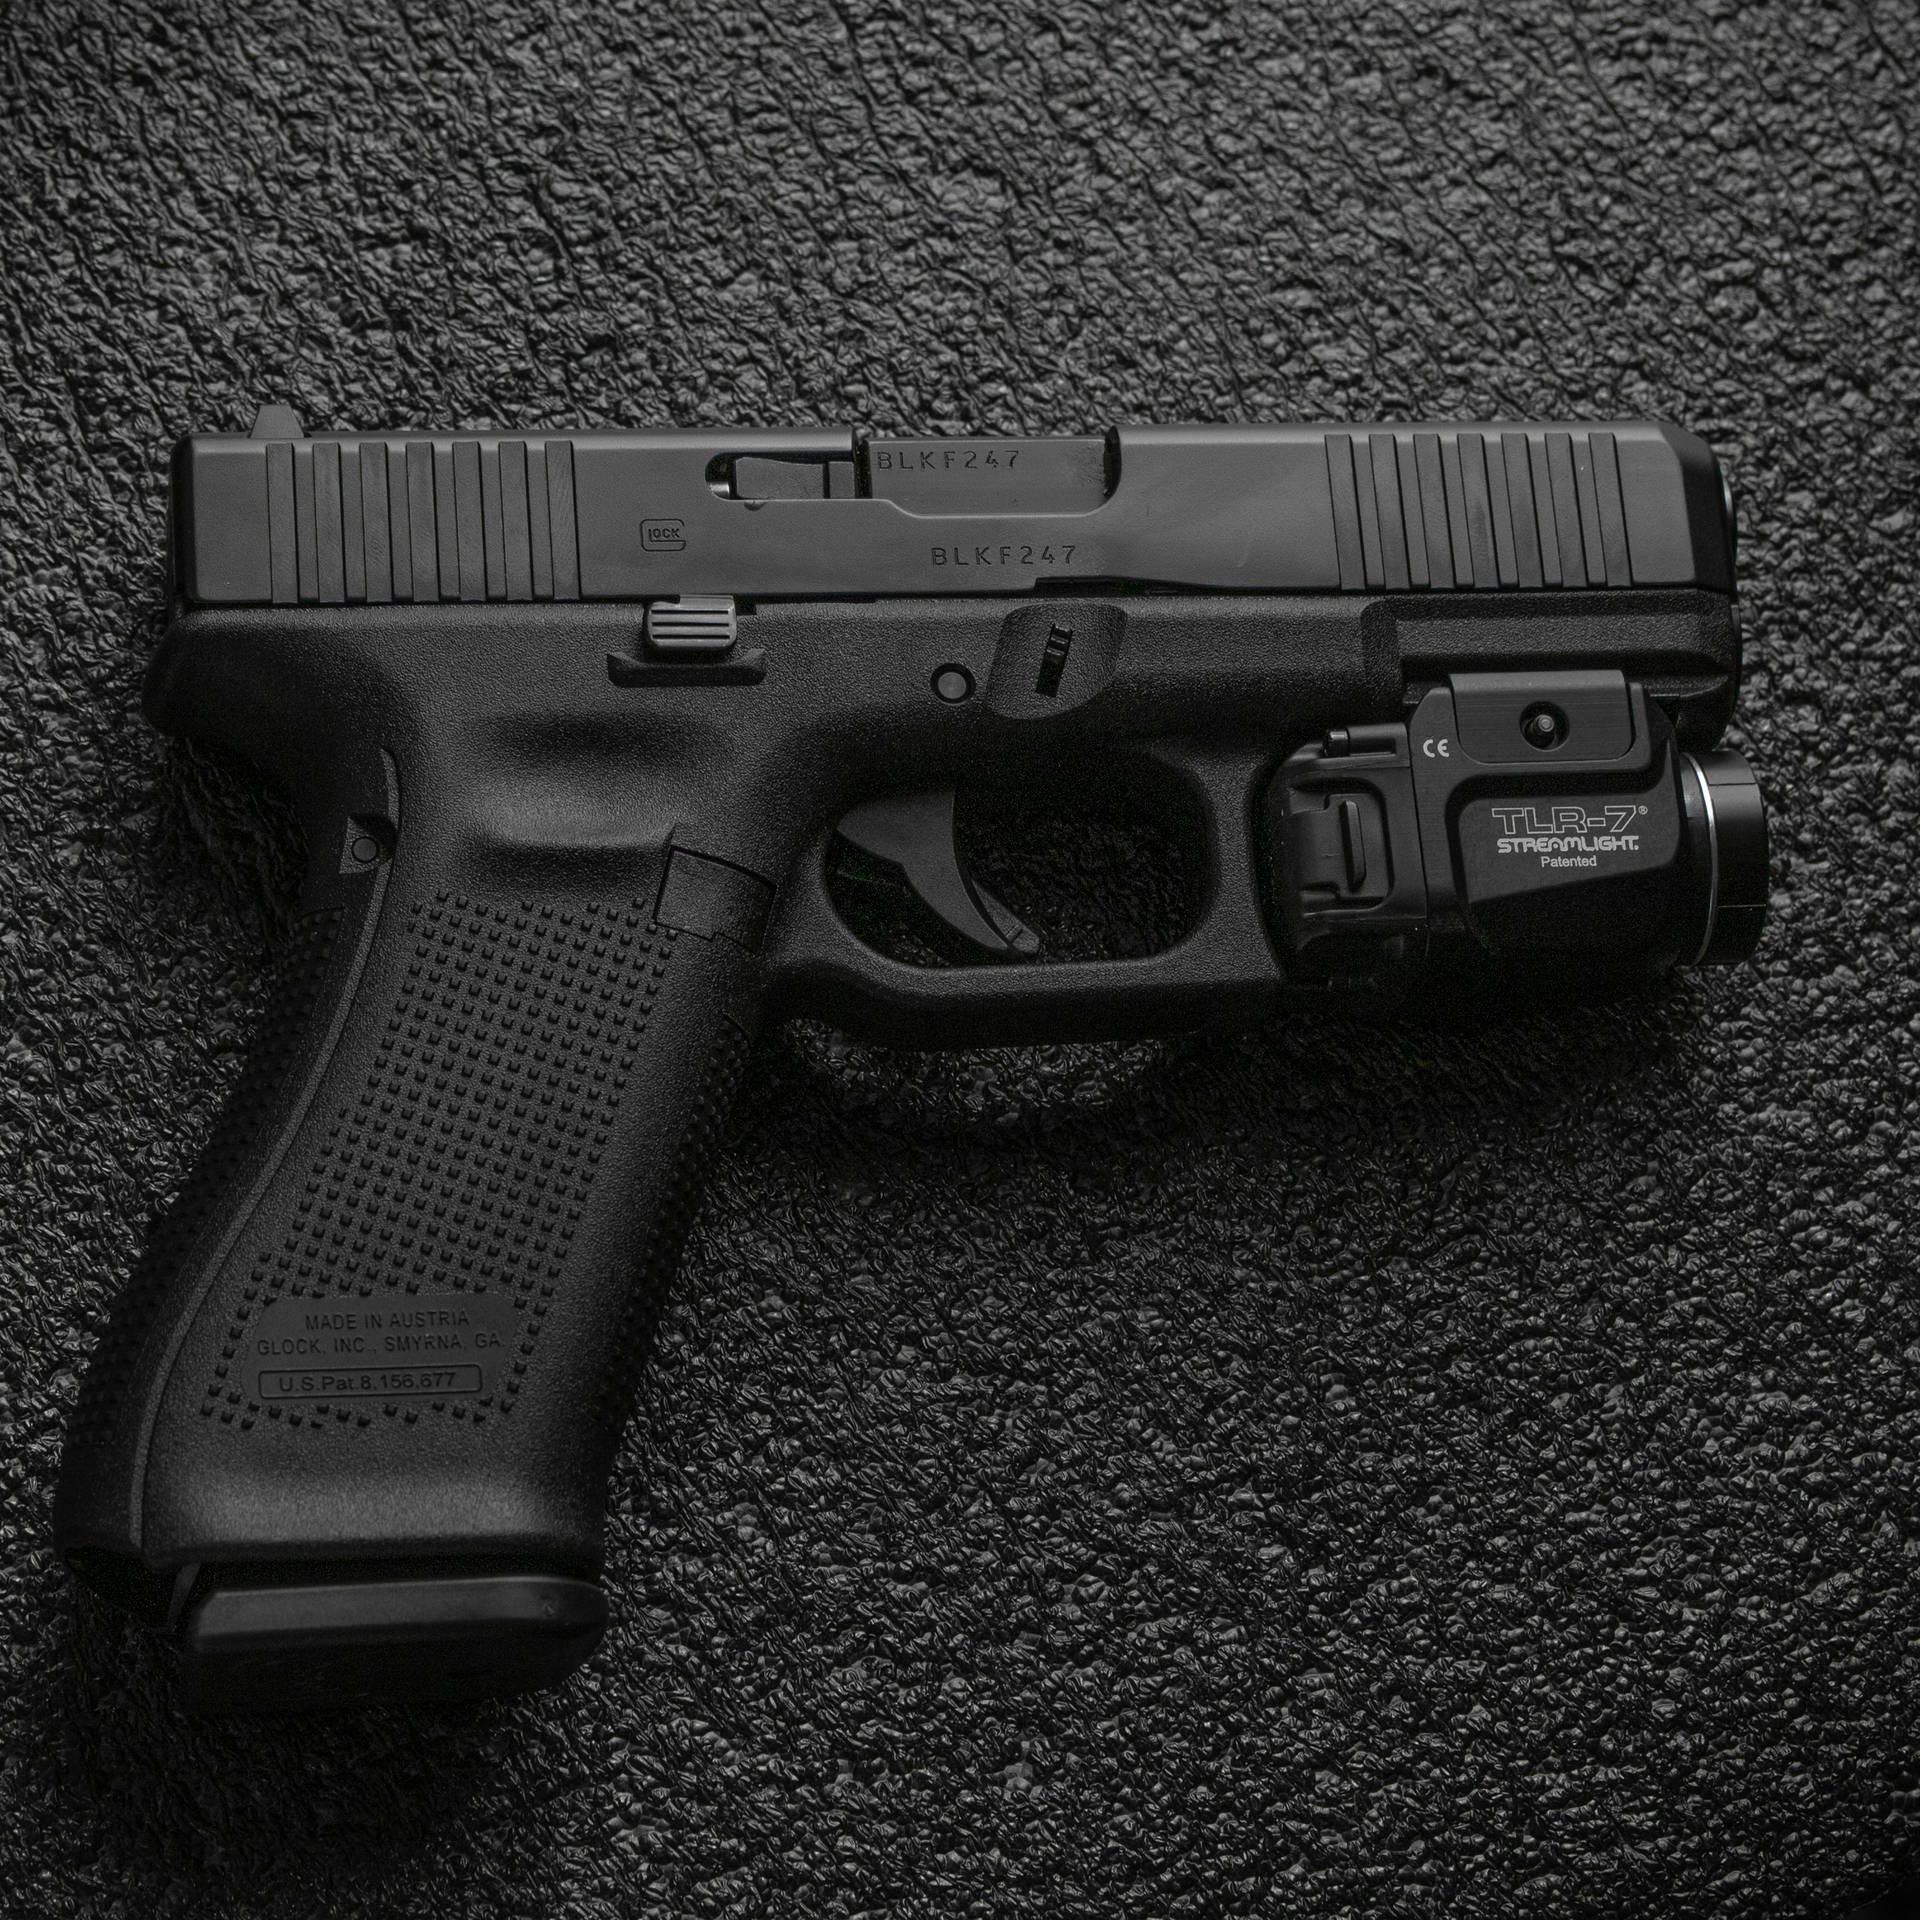 Glock On Black Concrete Surface Picture